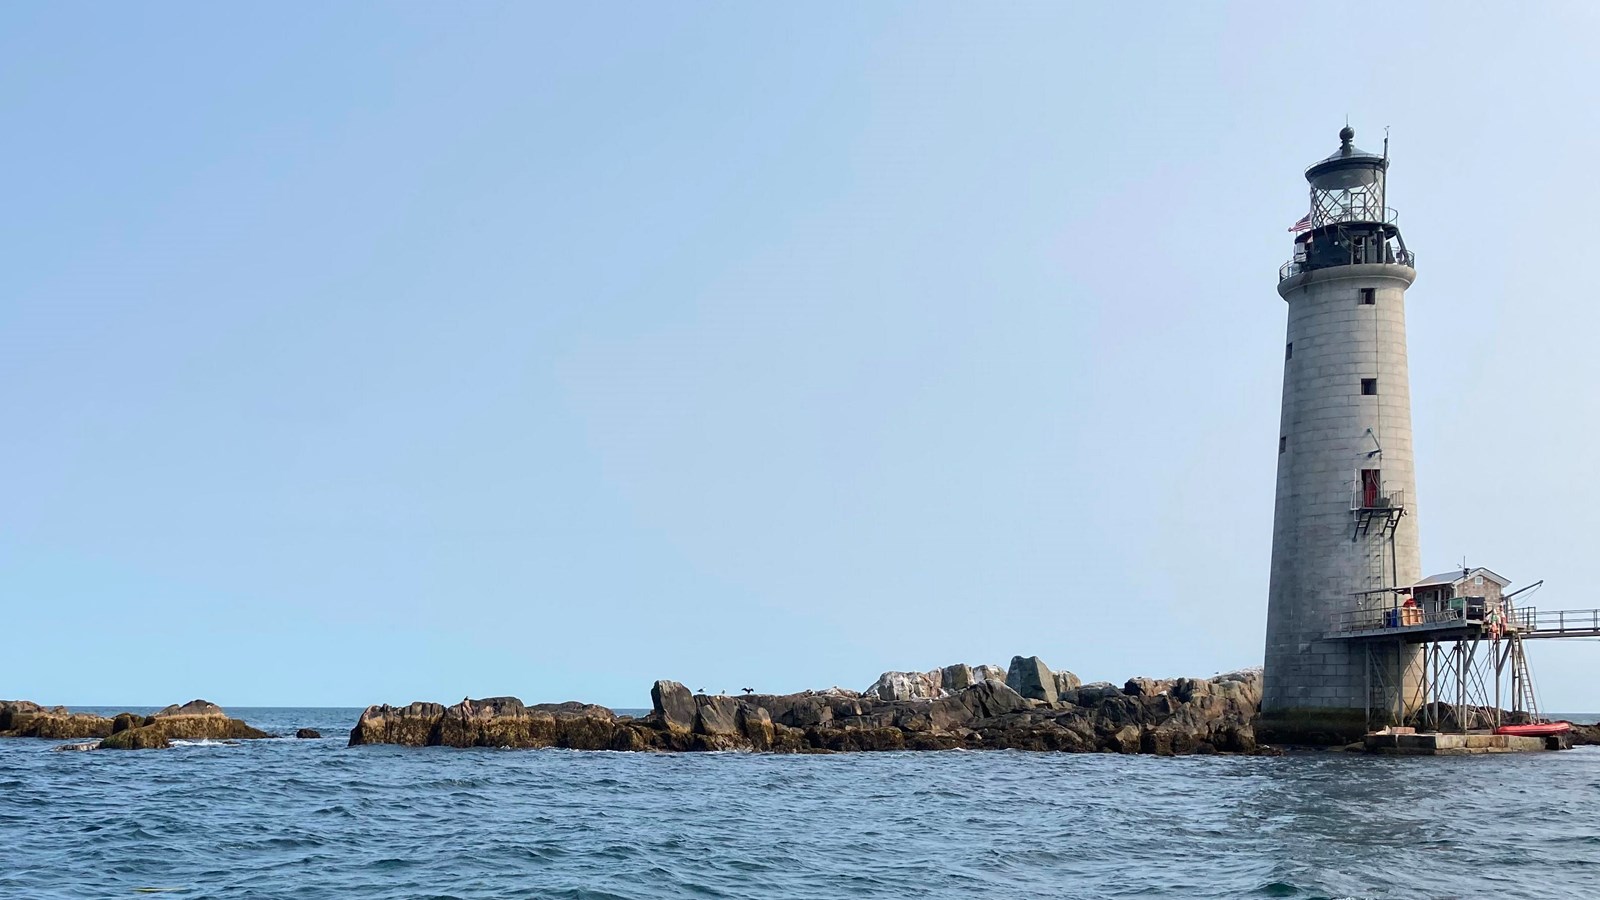 View of the rocky island looking up from the water with the grey lighthouse on the right